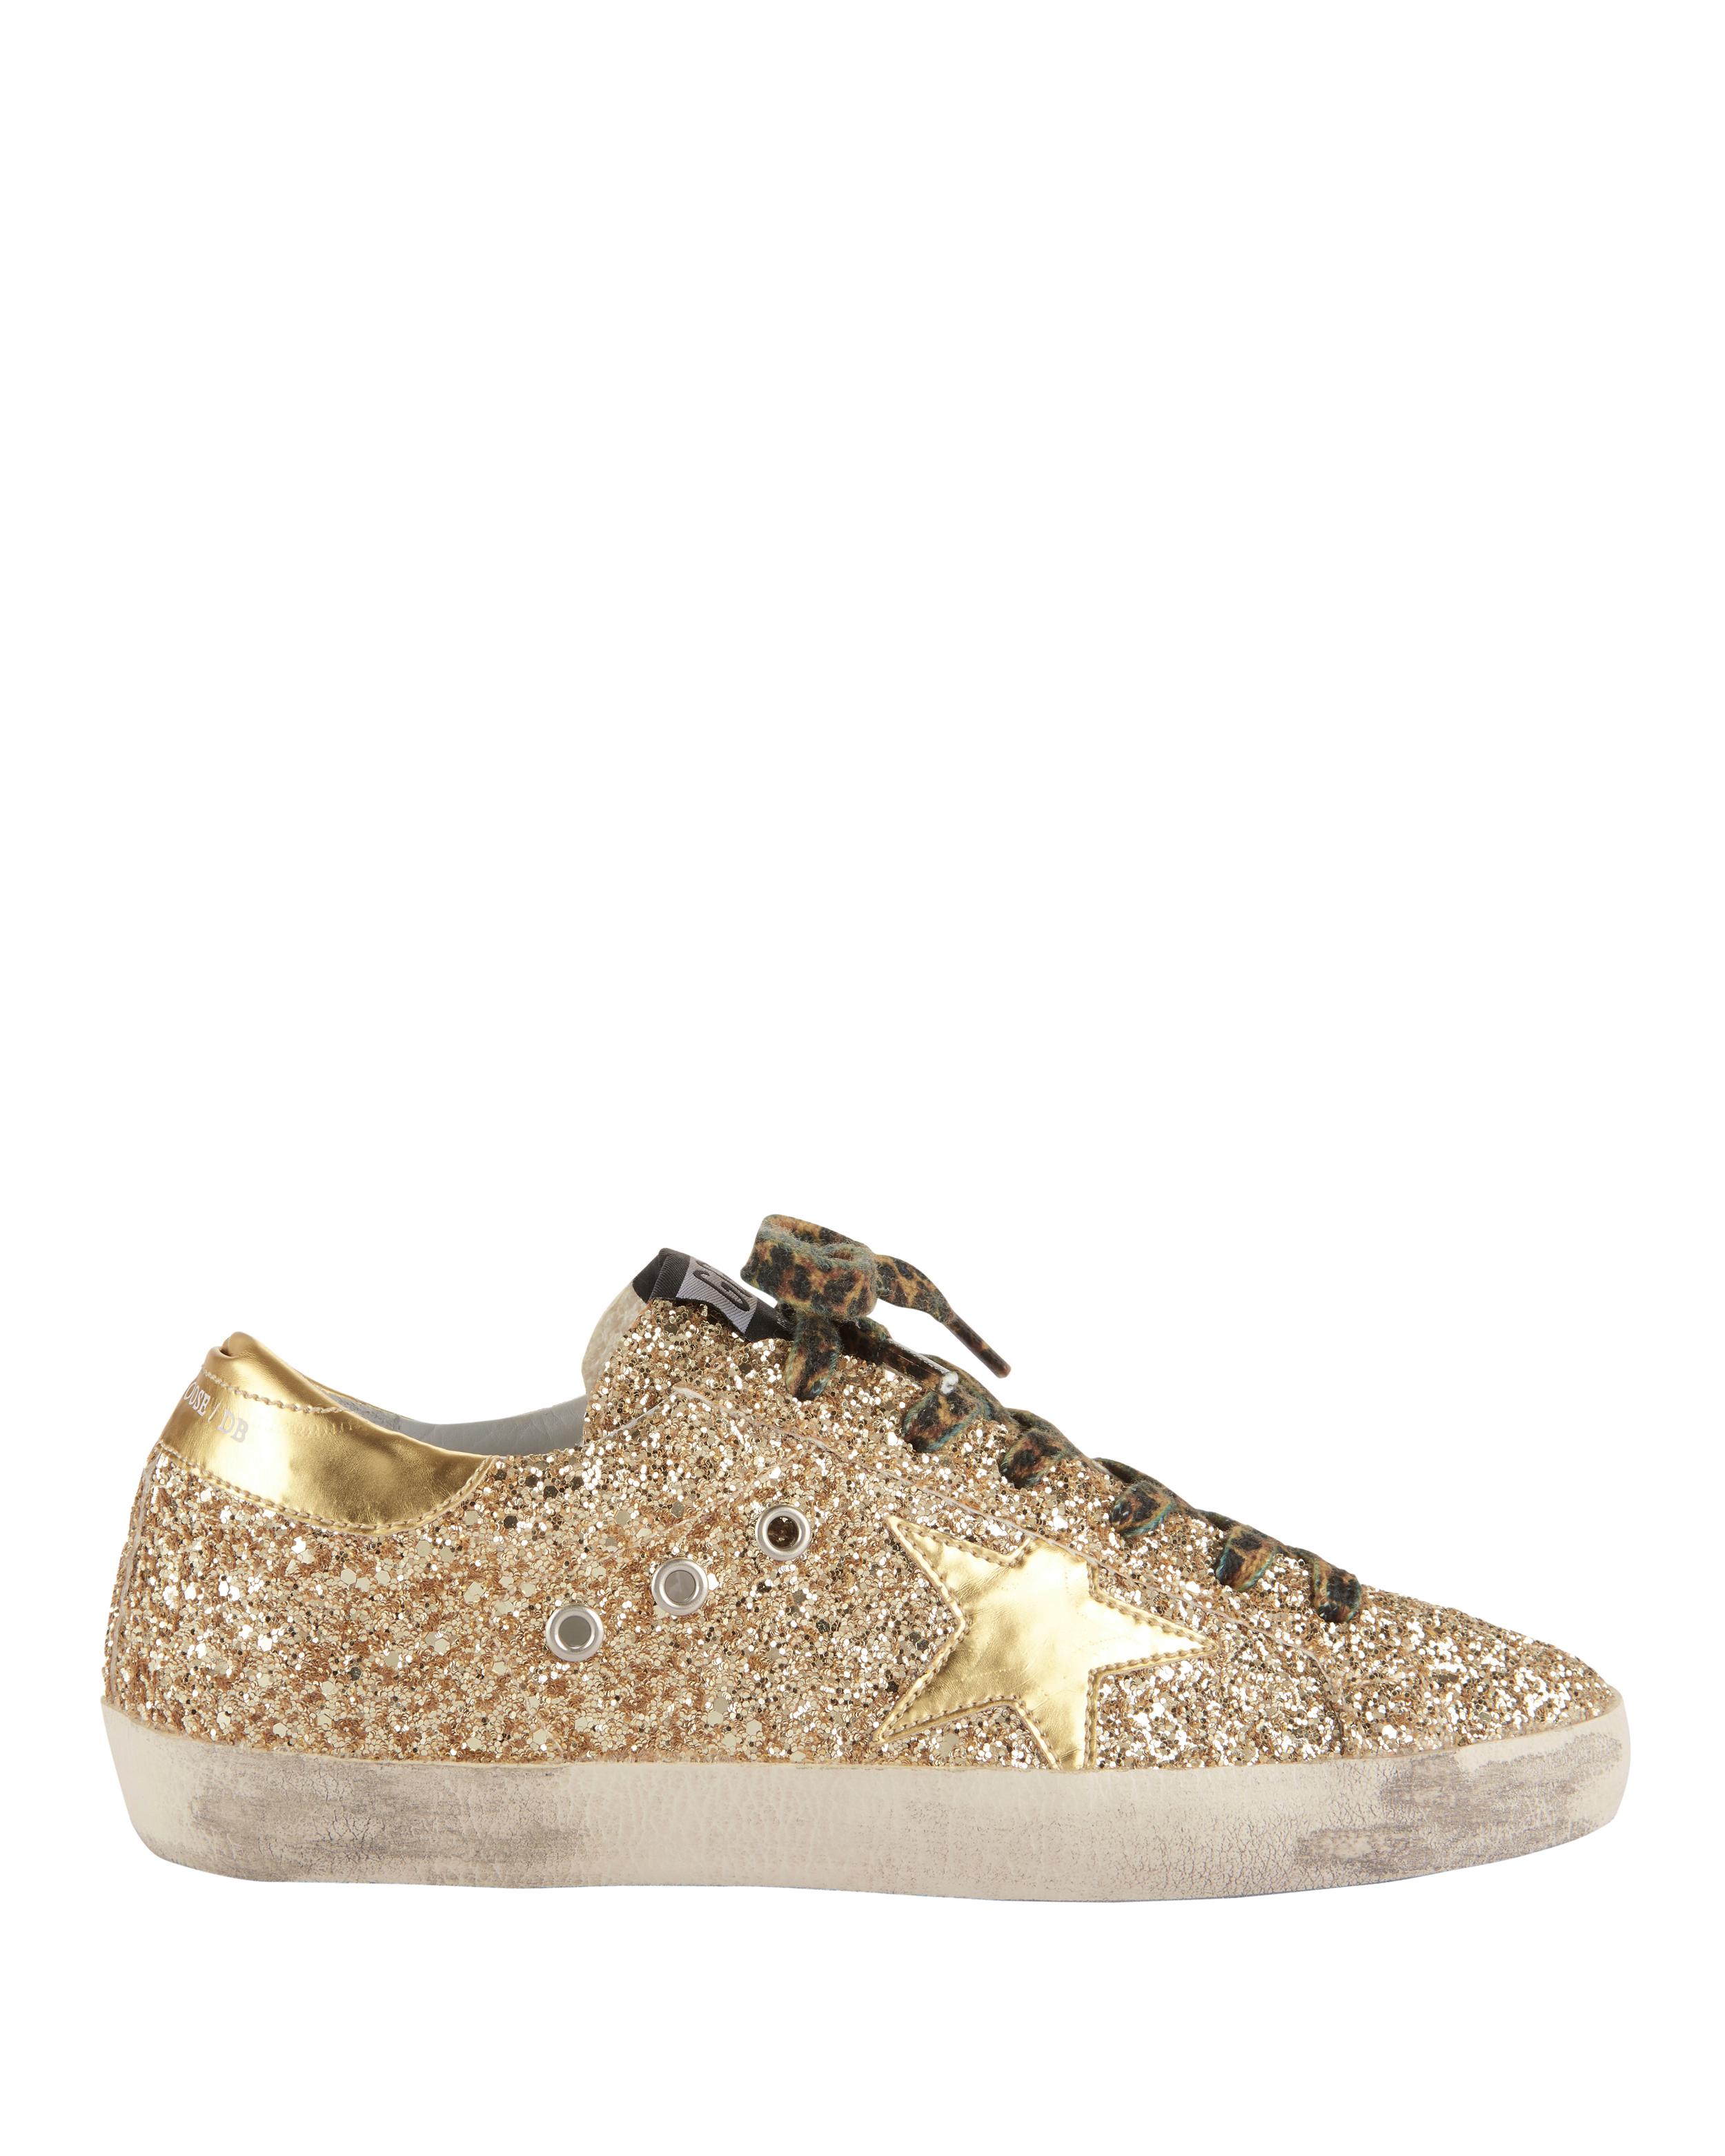 Golden Goose Superstar Leopard Lace Gold Glitter Sneakers in